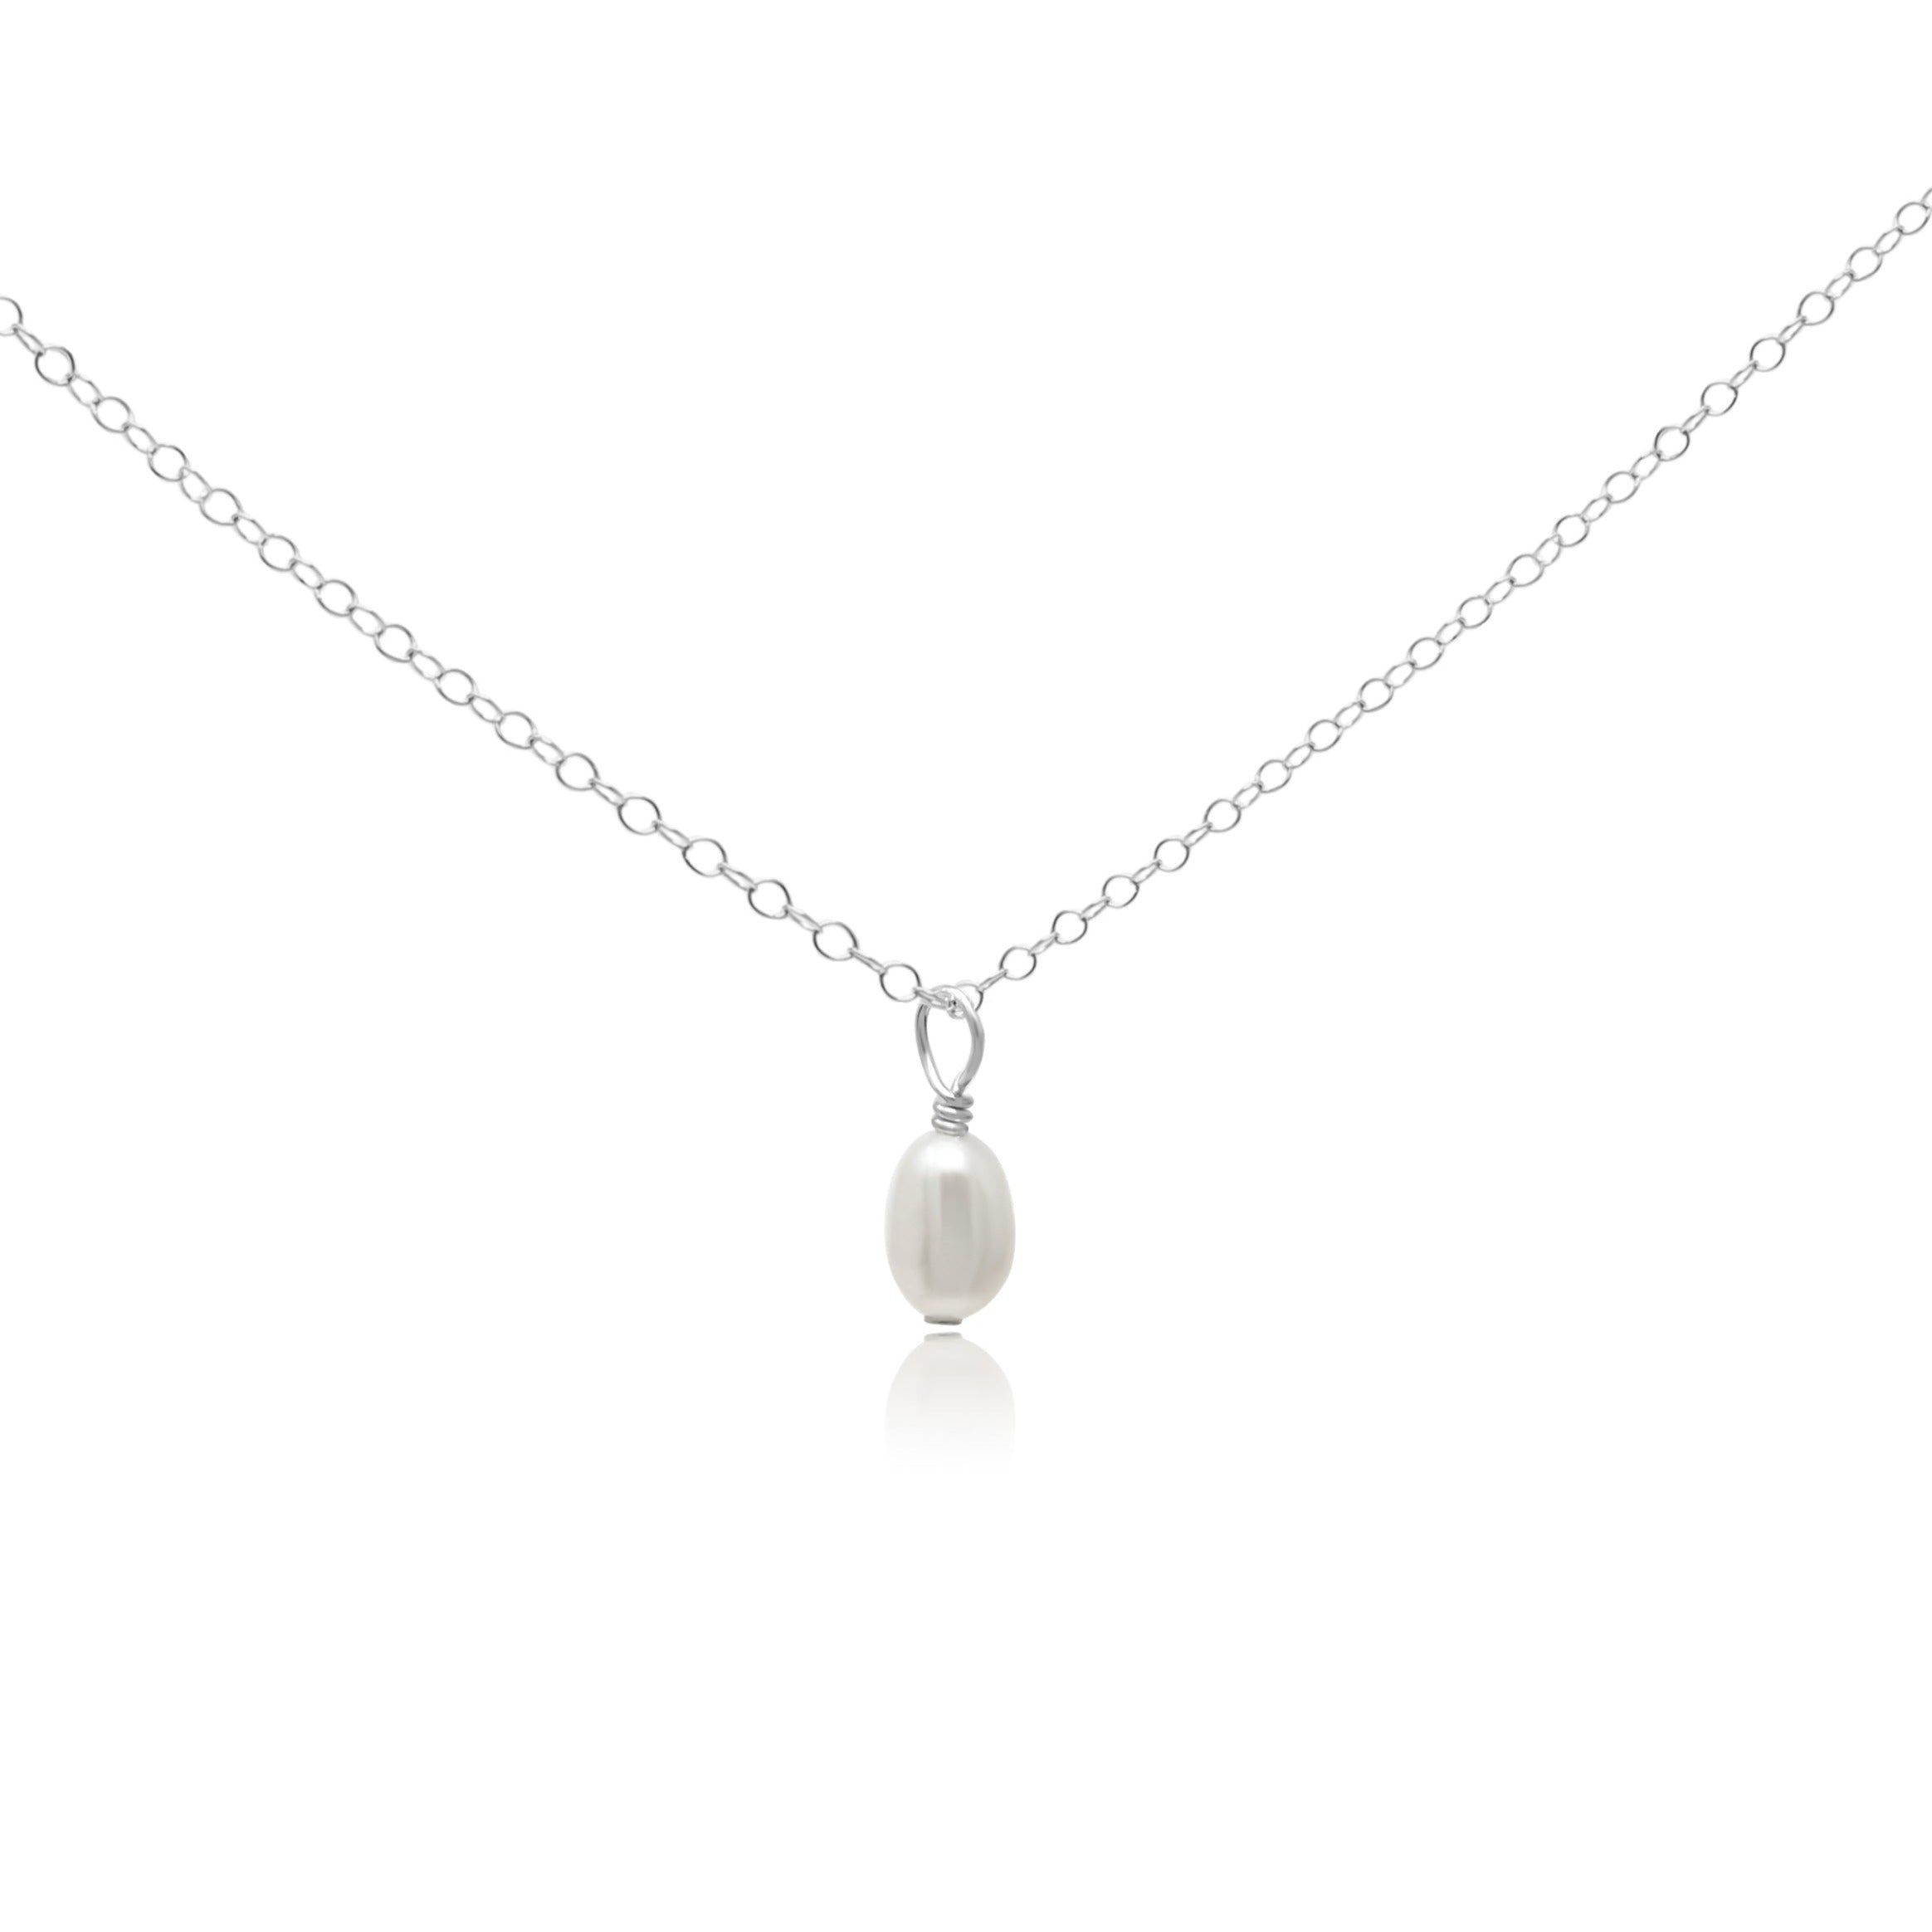 Small pearl pendant necklace with sterling silver chain